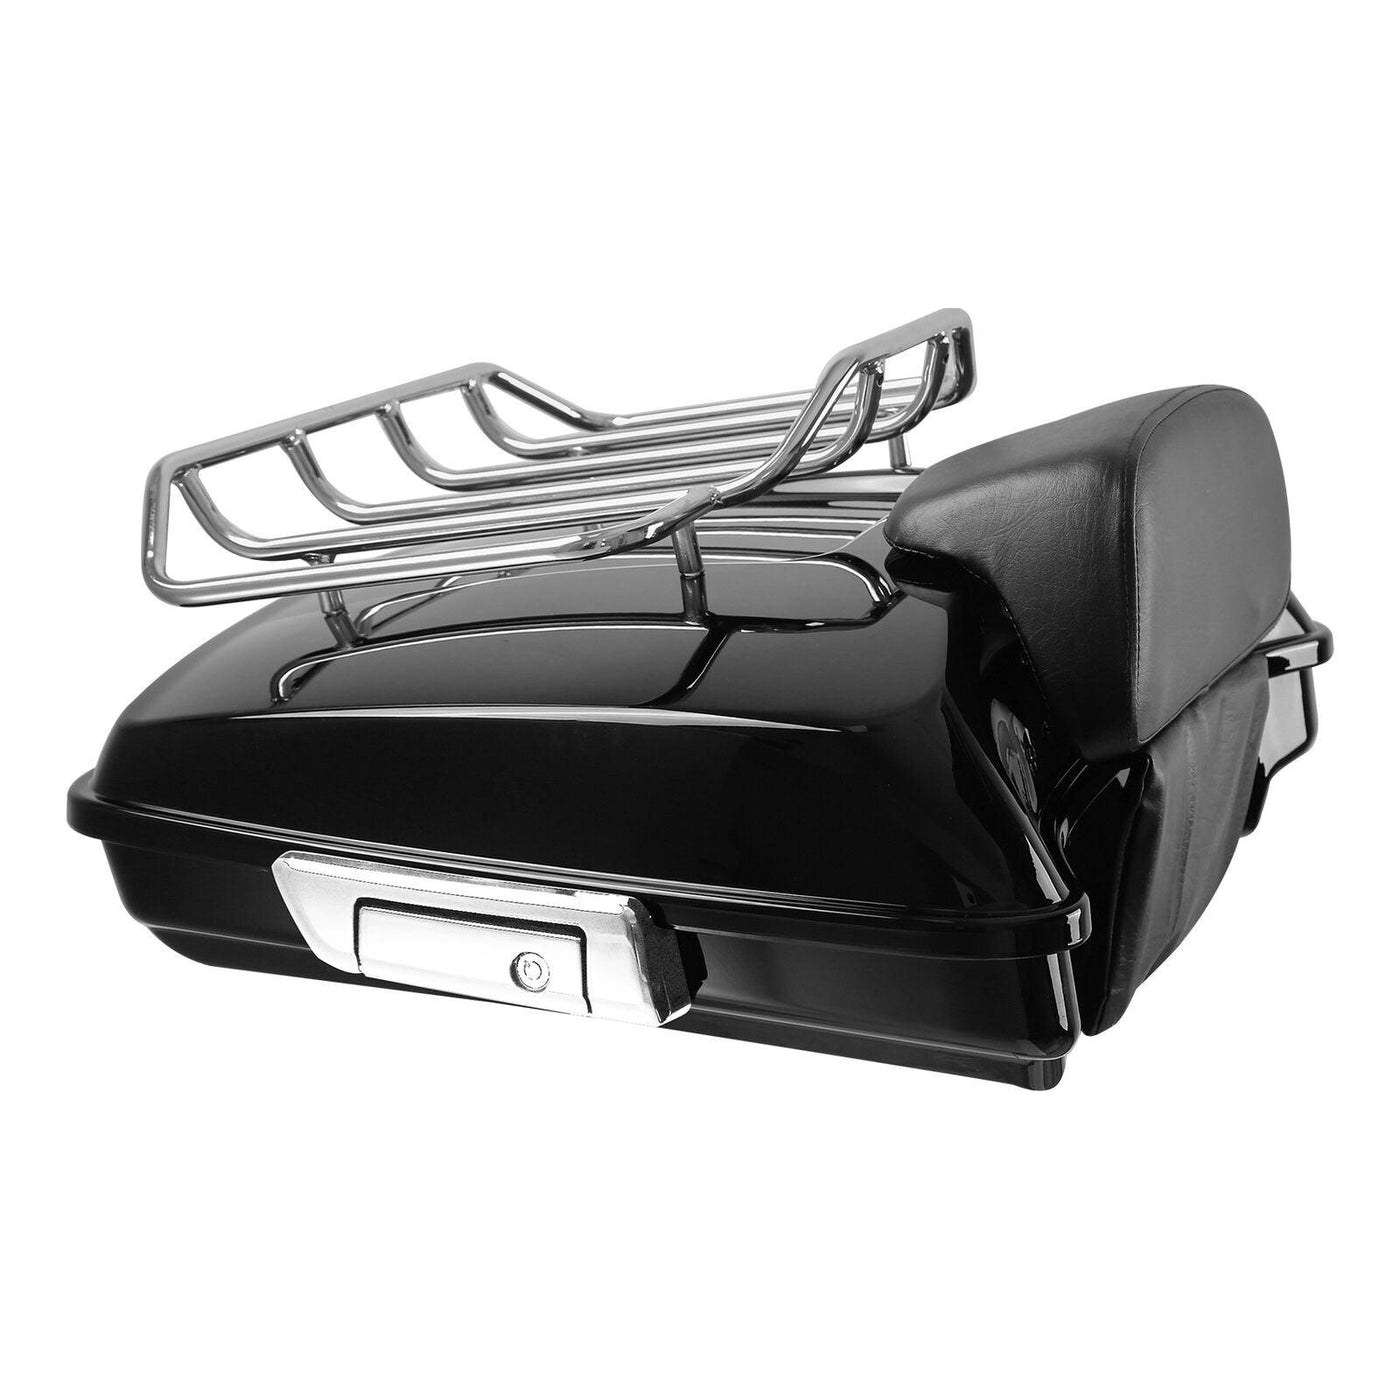 Razor Pack Trunk Pad Solo Mount Rack Fit For Harley Tour Pak Road Glide 14-22 US - Moto Life Products